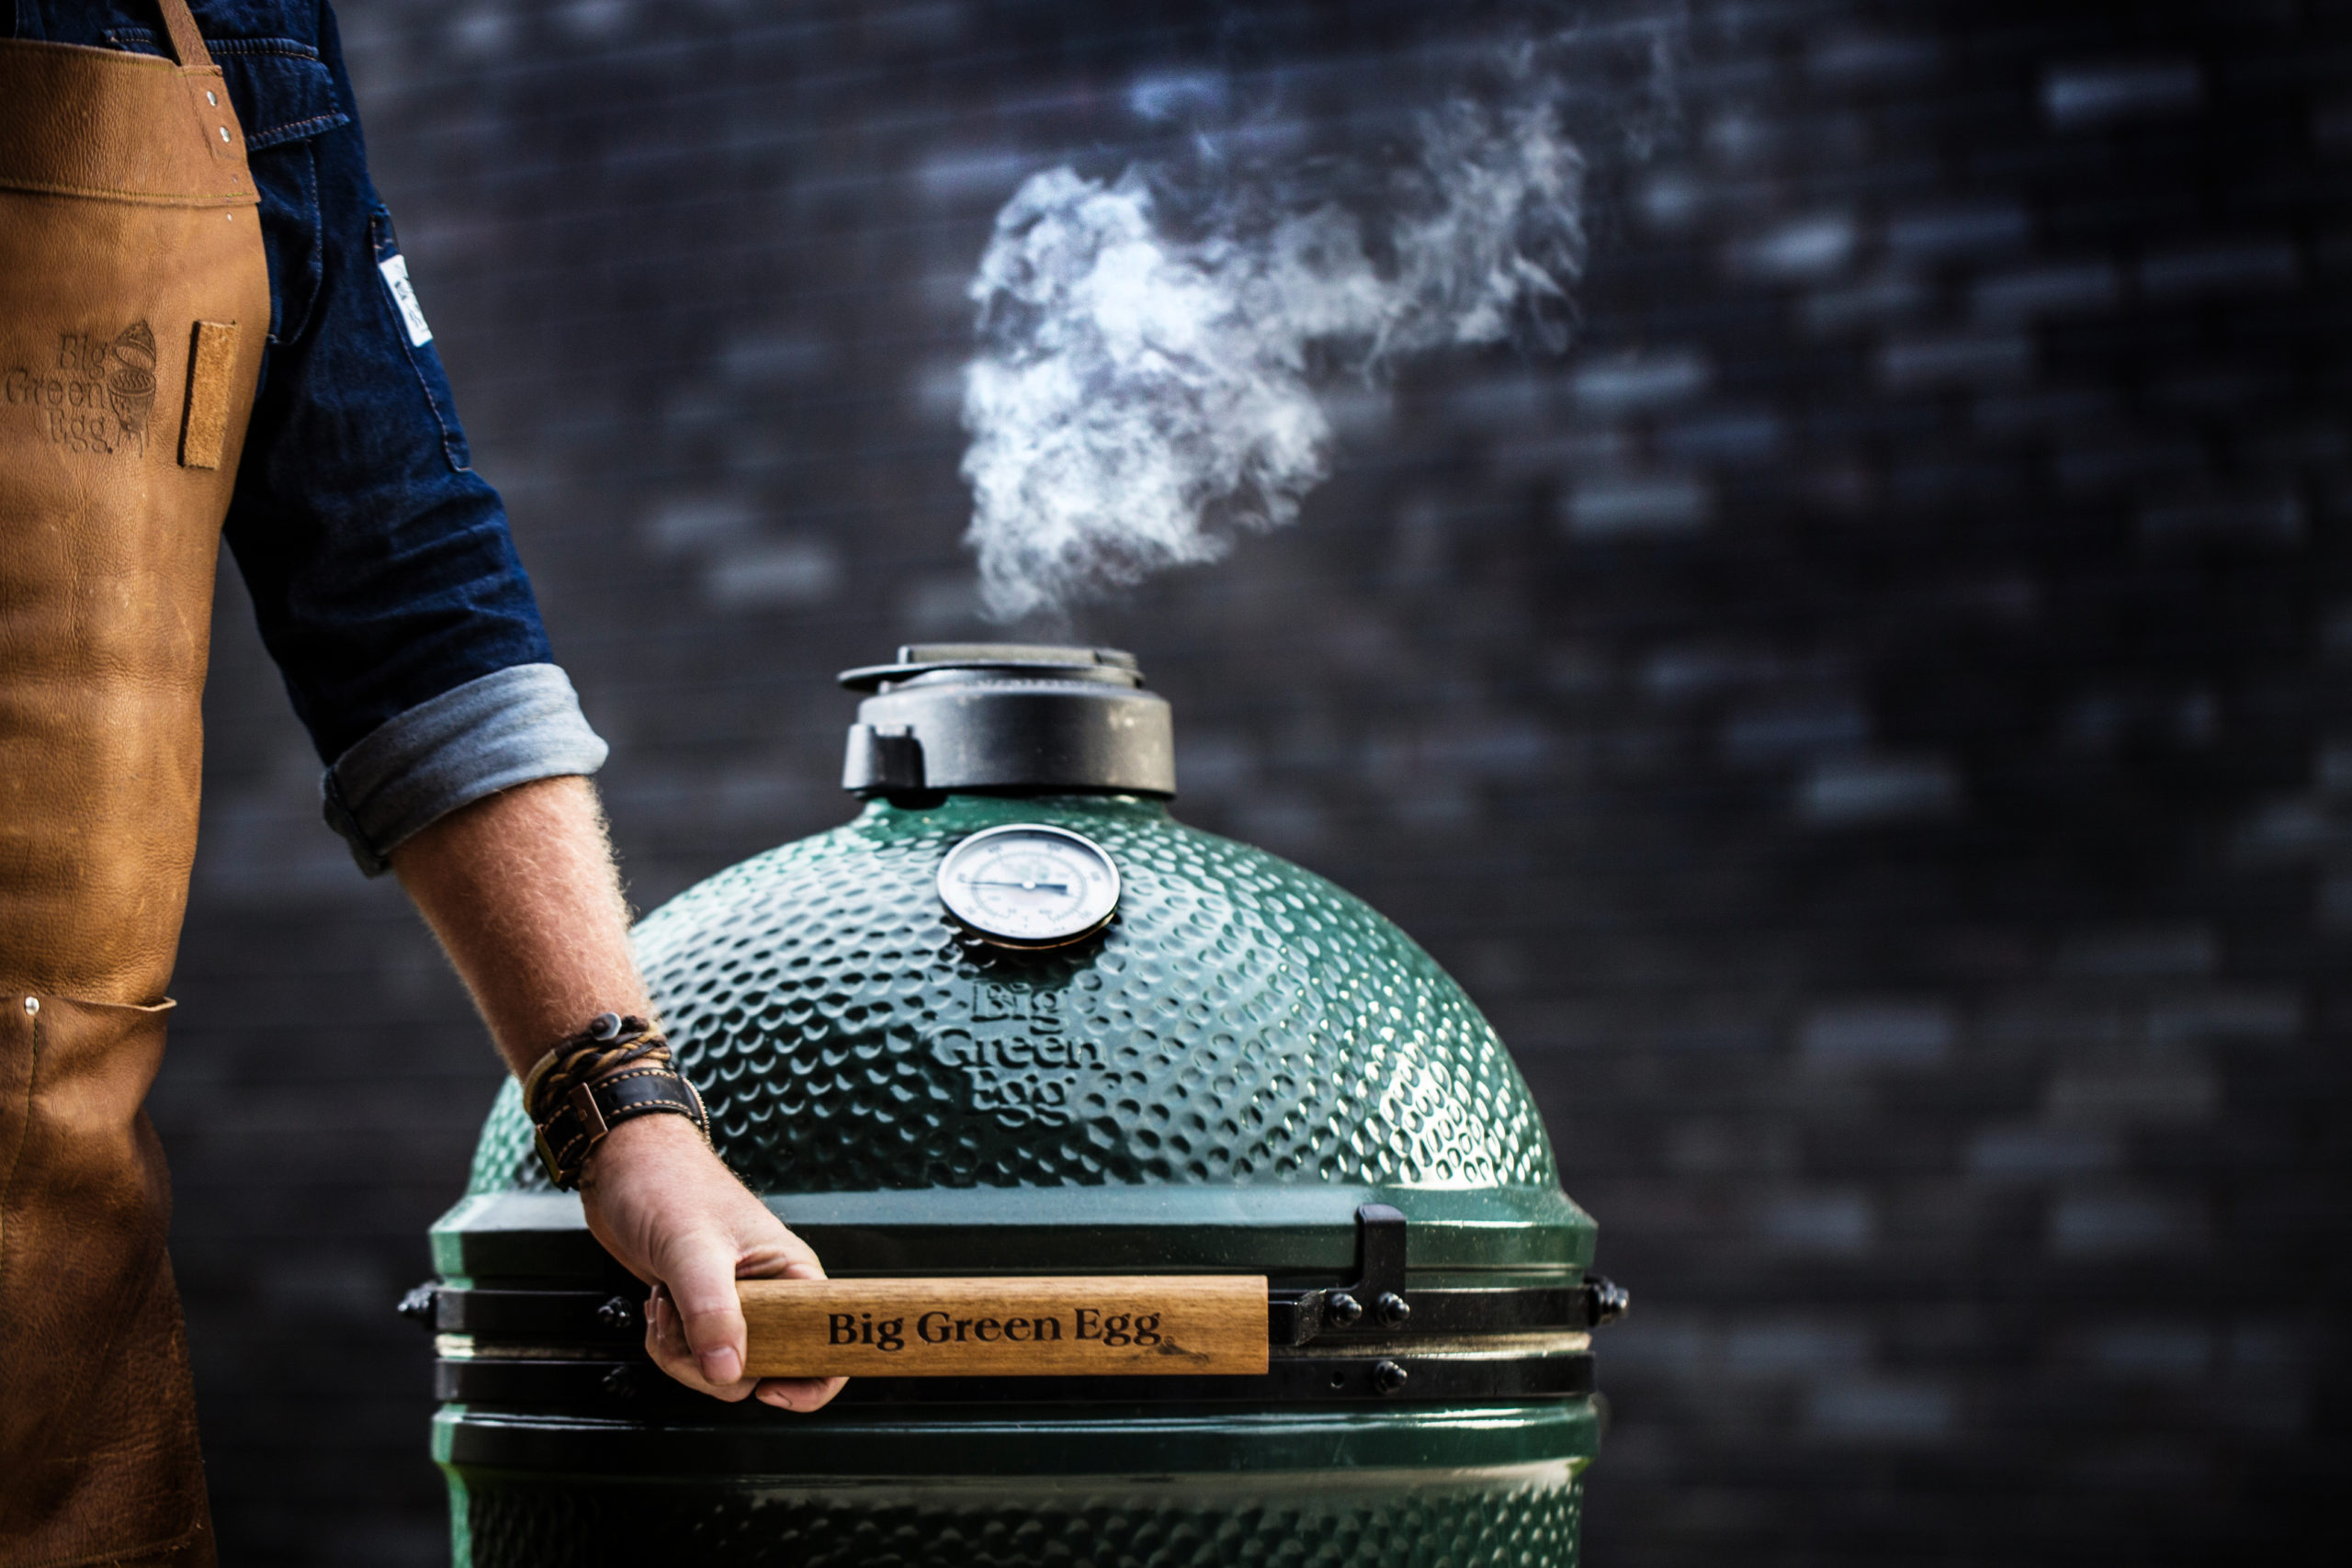 Hand_Opening Large Big Green Egg with Smoke-4320x2880